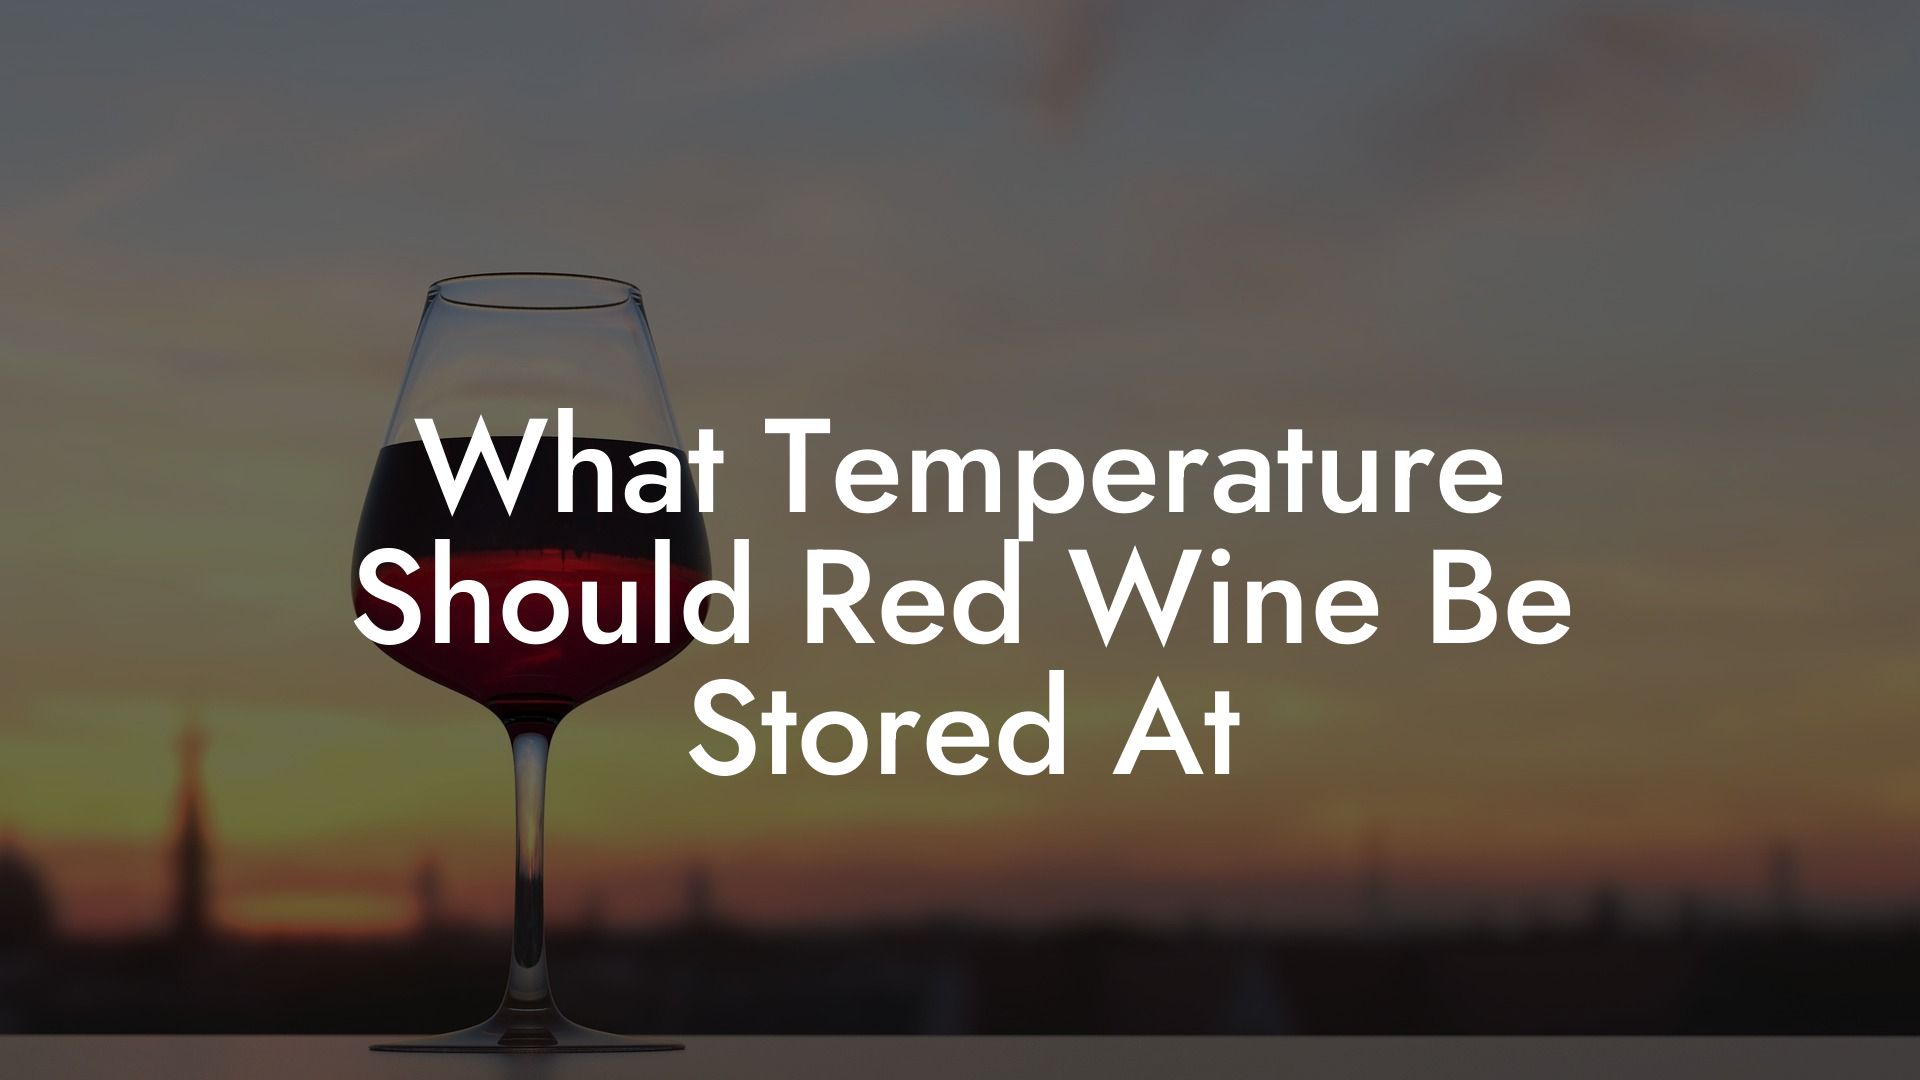 What Temperature Should Red Wine Be Stored At